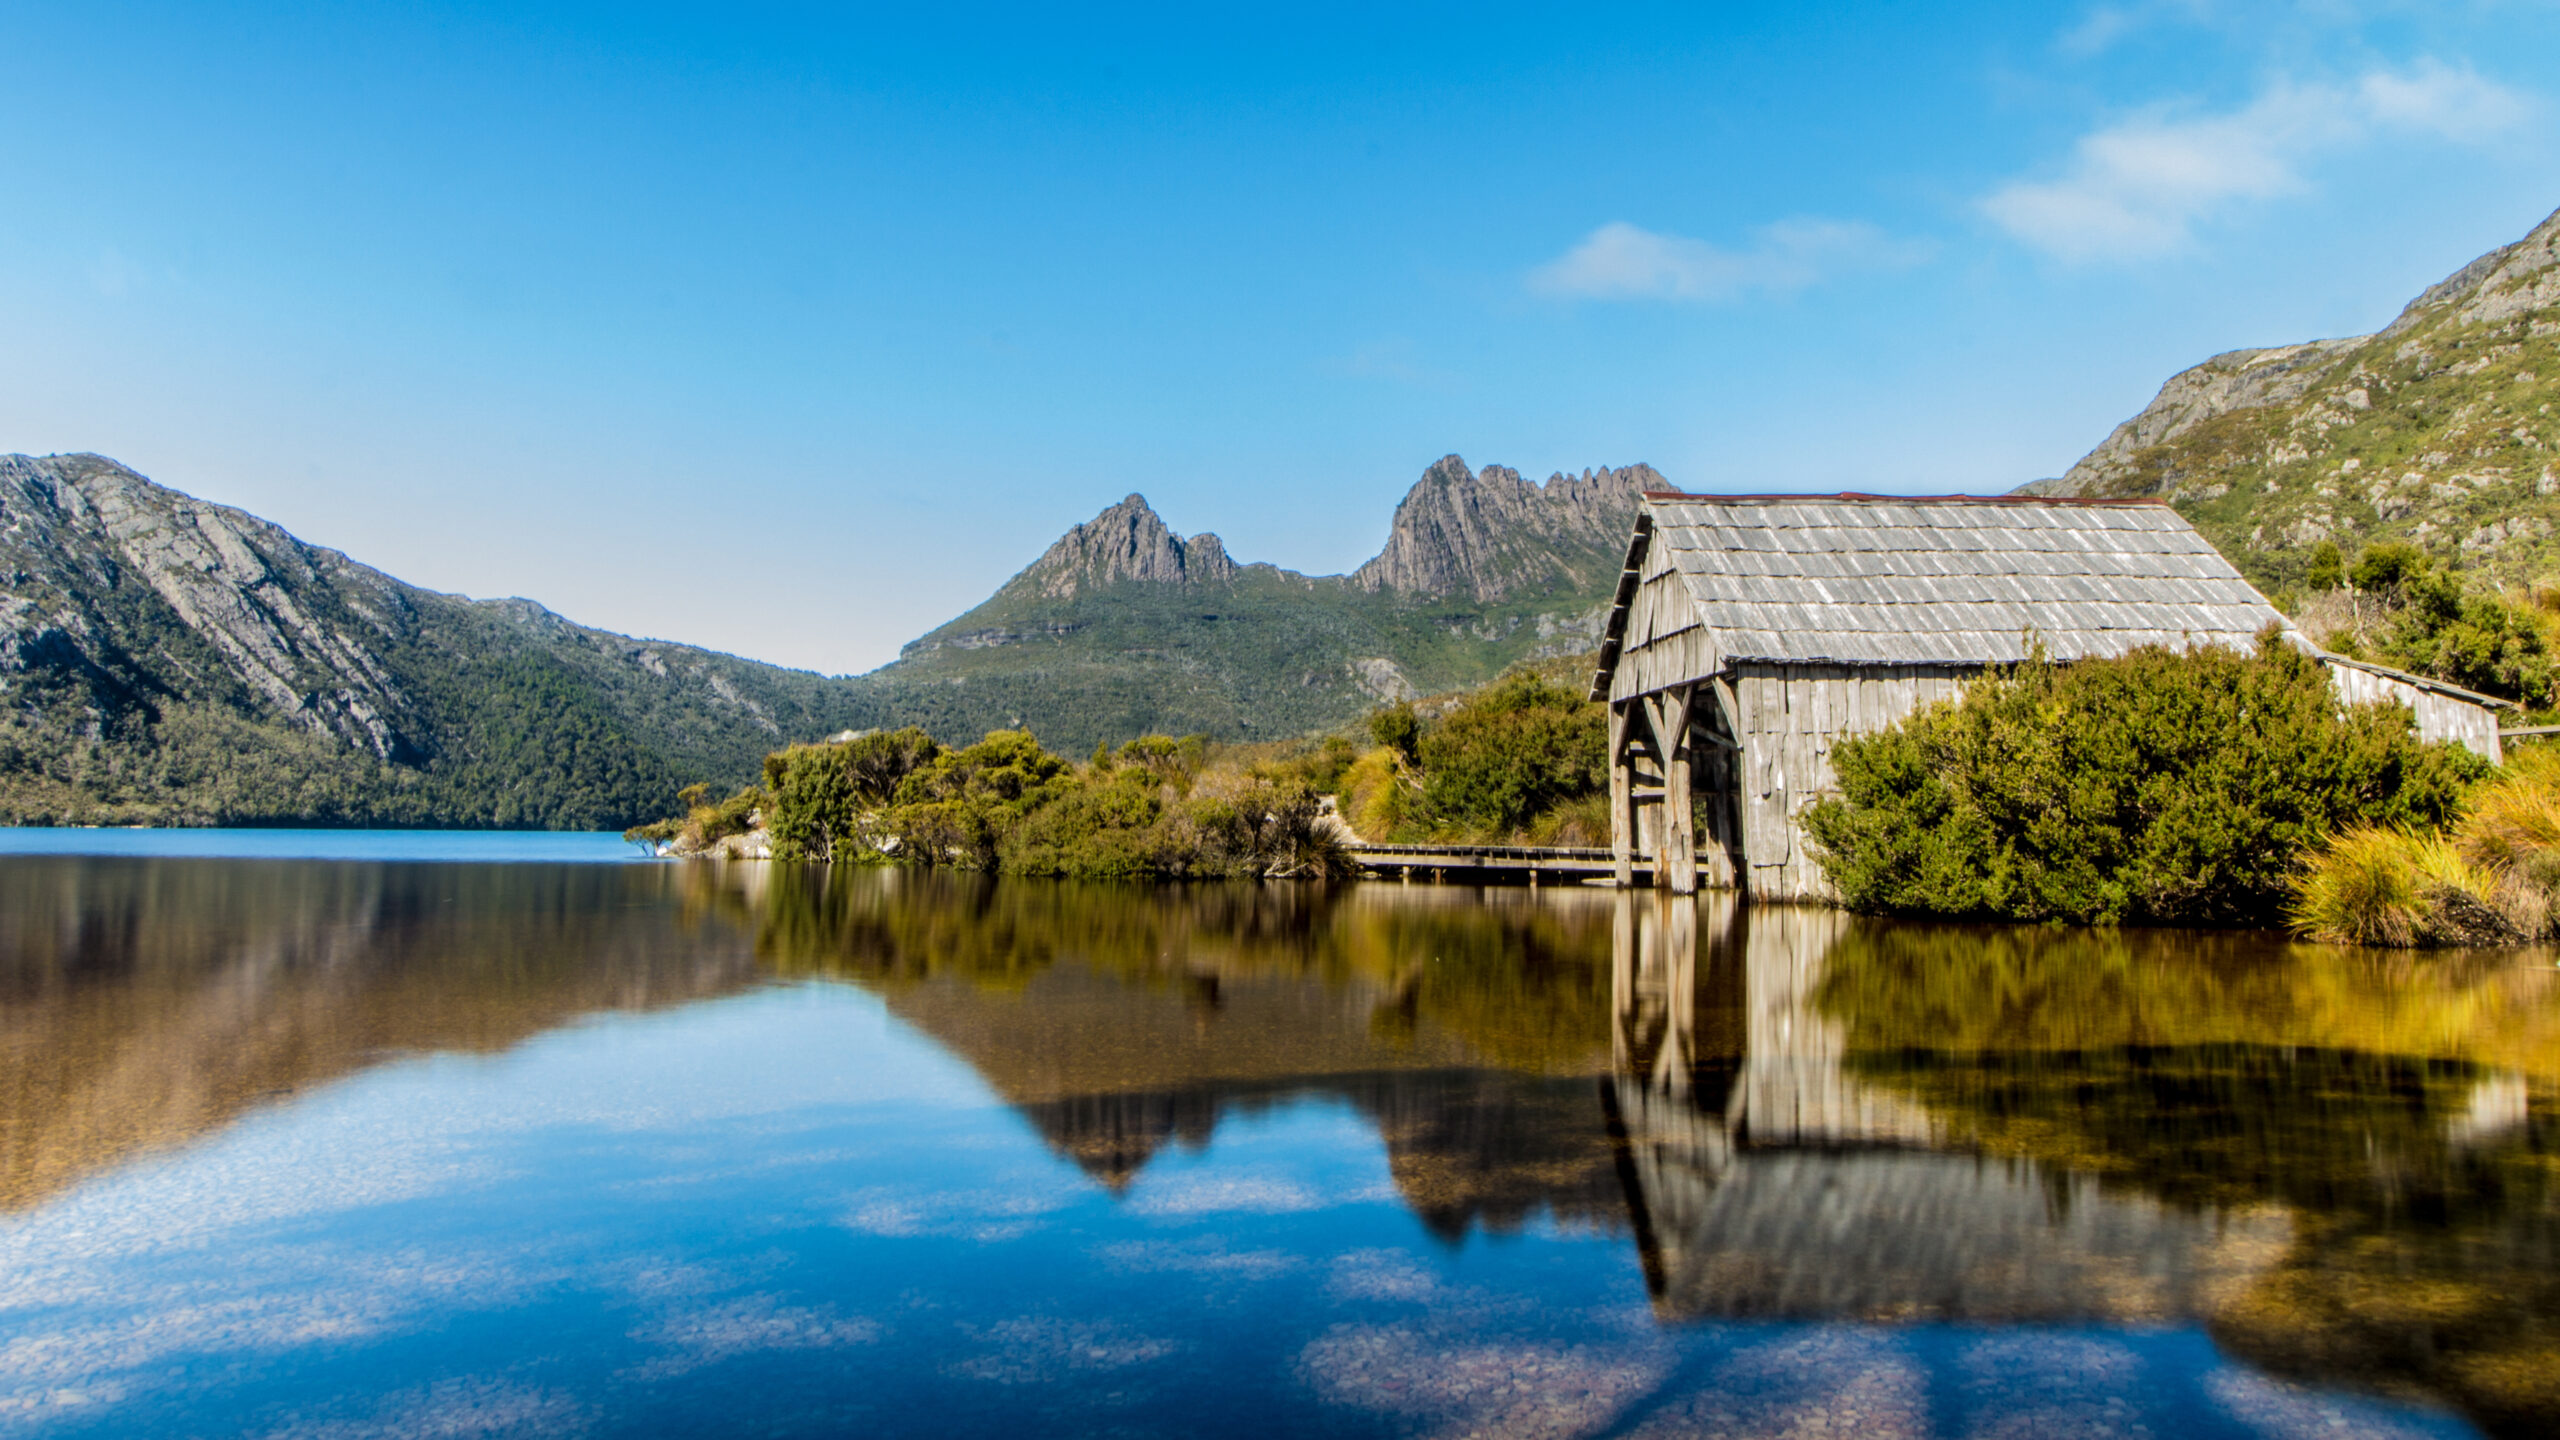 View of a hut on the edge of a lake in Cradle Mountain